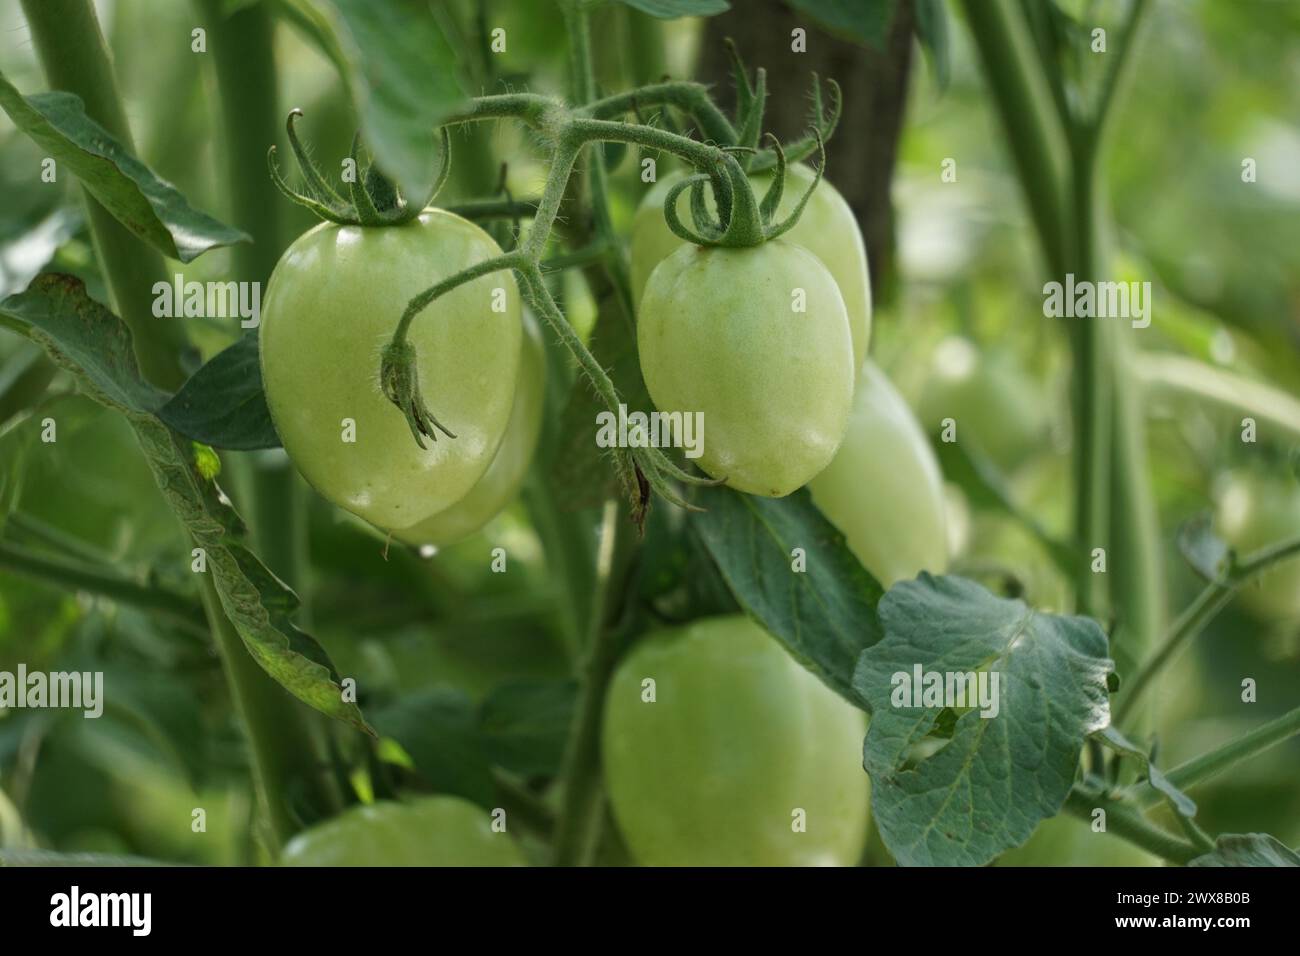 Green tomato (Also called Solanum lycopersicum, Lycopersicon lycopersicum, Lycopersicon esculentum) on the tree Stock Photo